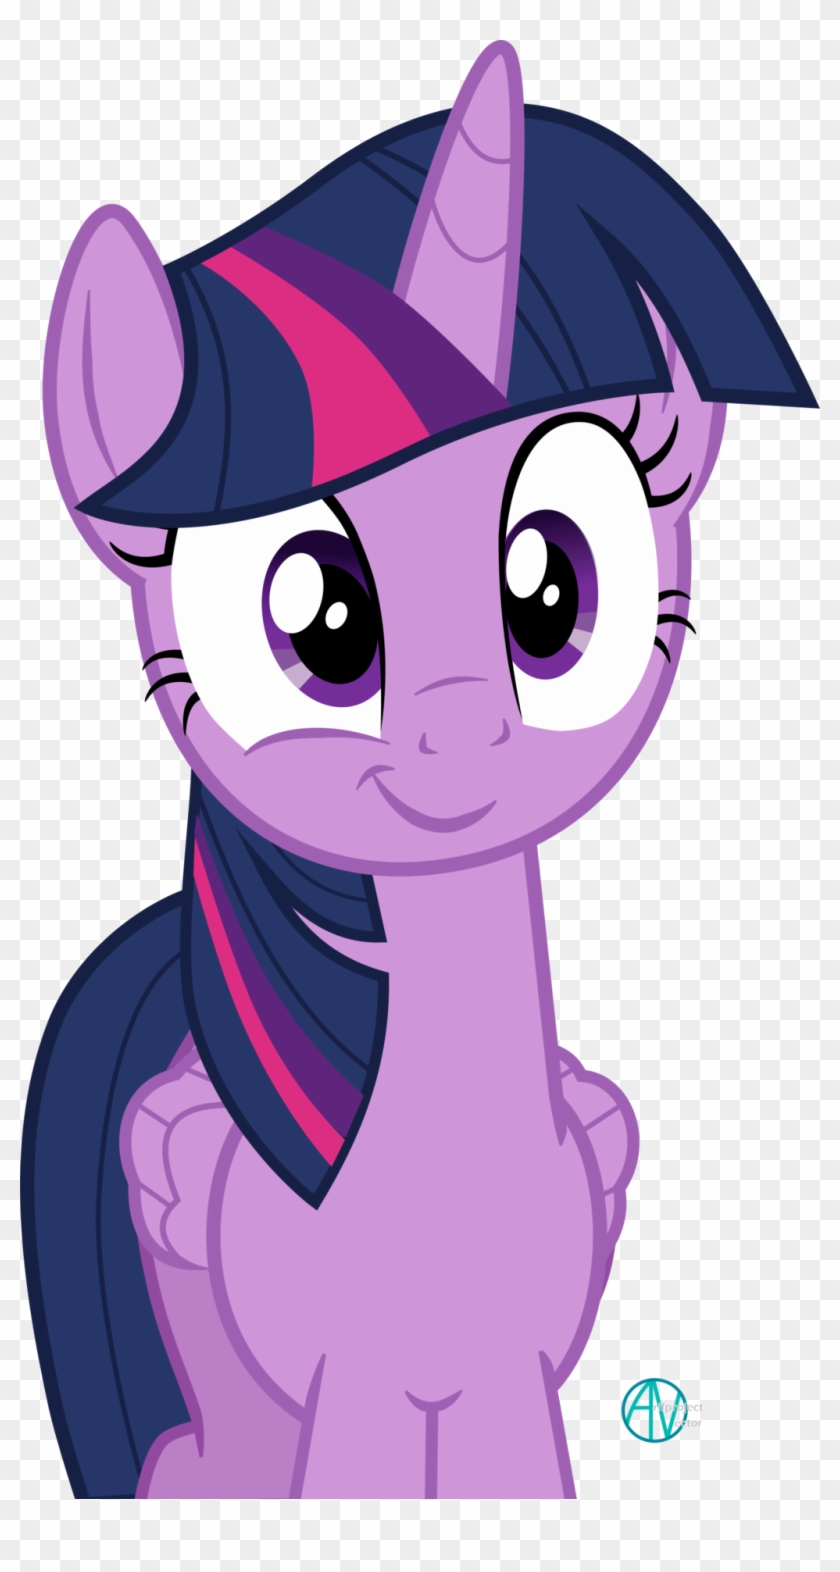 Twilight Sparkle Smirk Vector By Arifproject Twilight - Twilight Sparkle Vector #732403